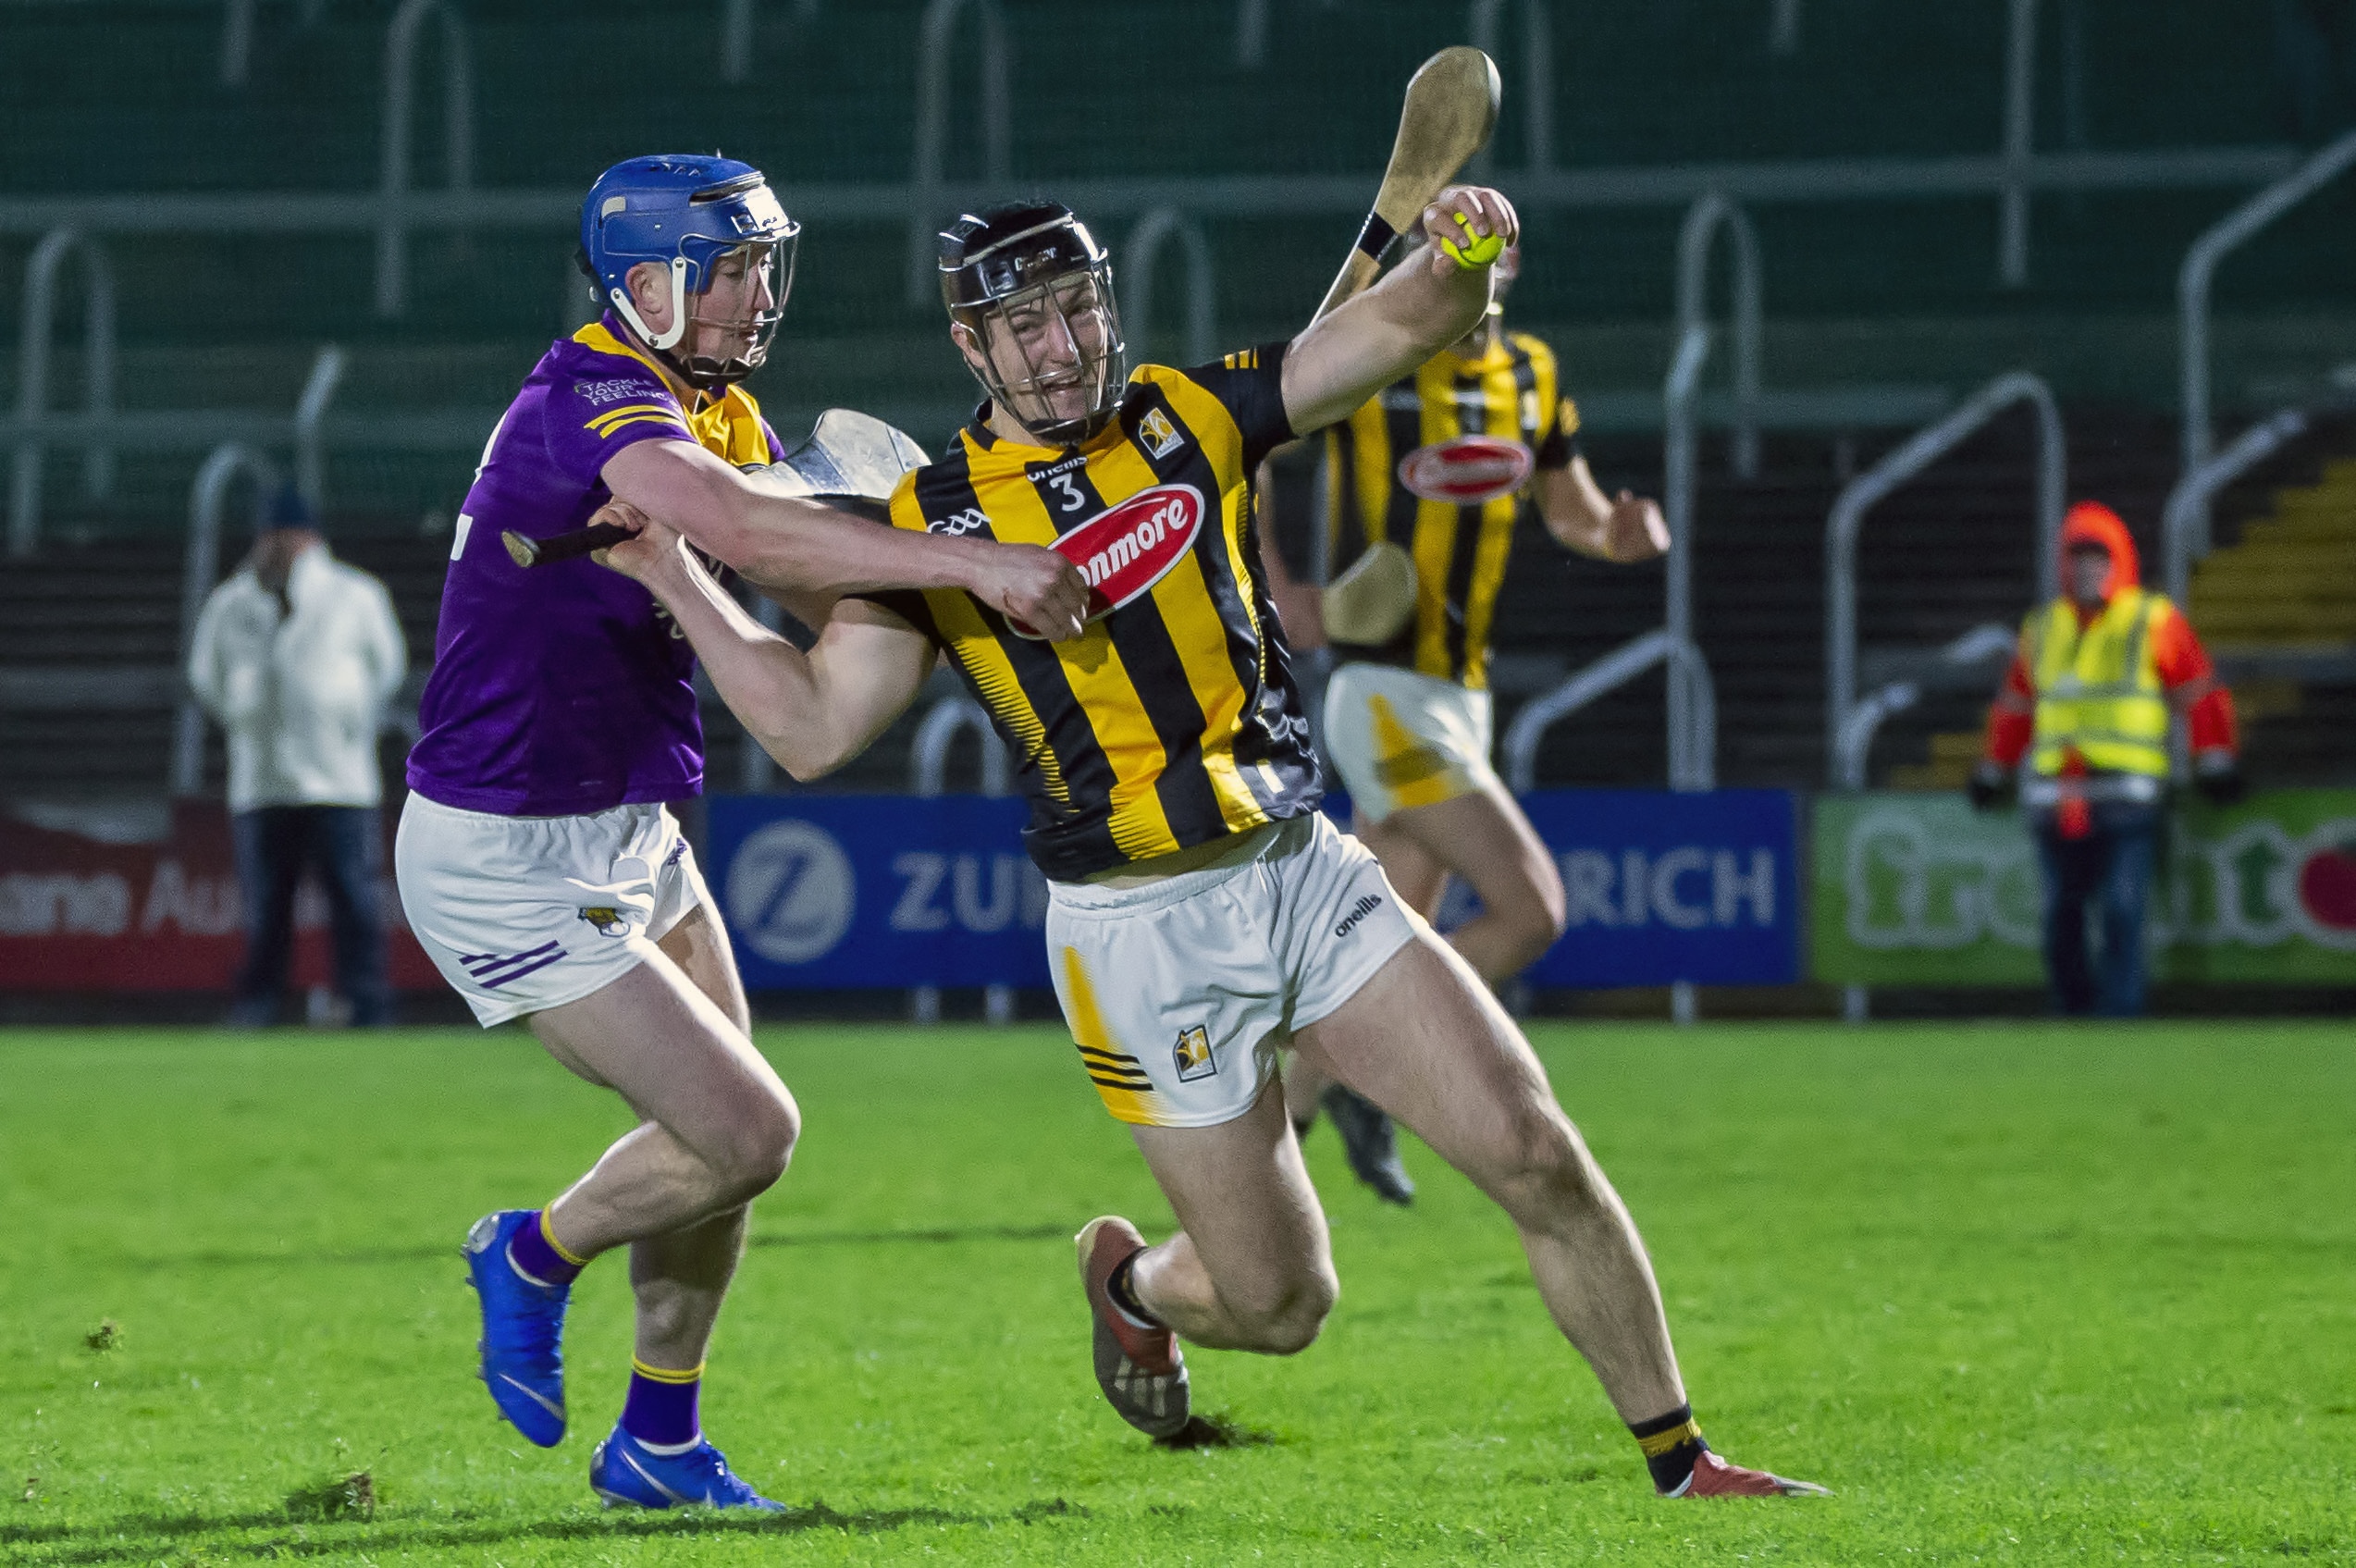 Trip to Wexford Park ends in defeat